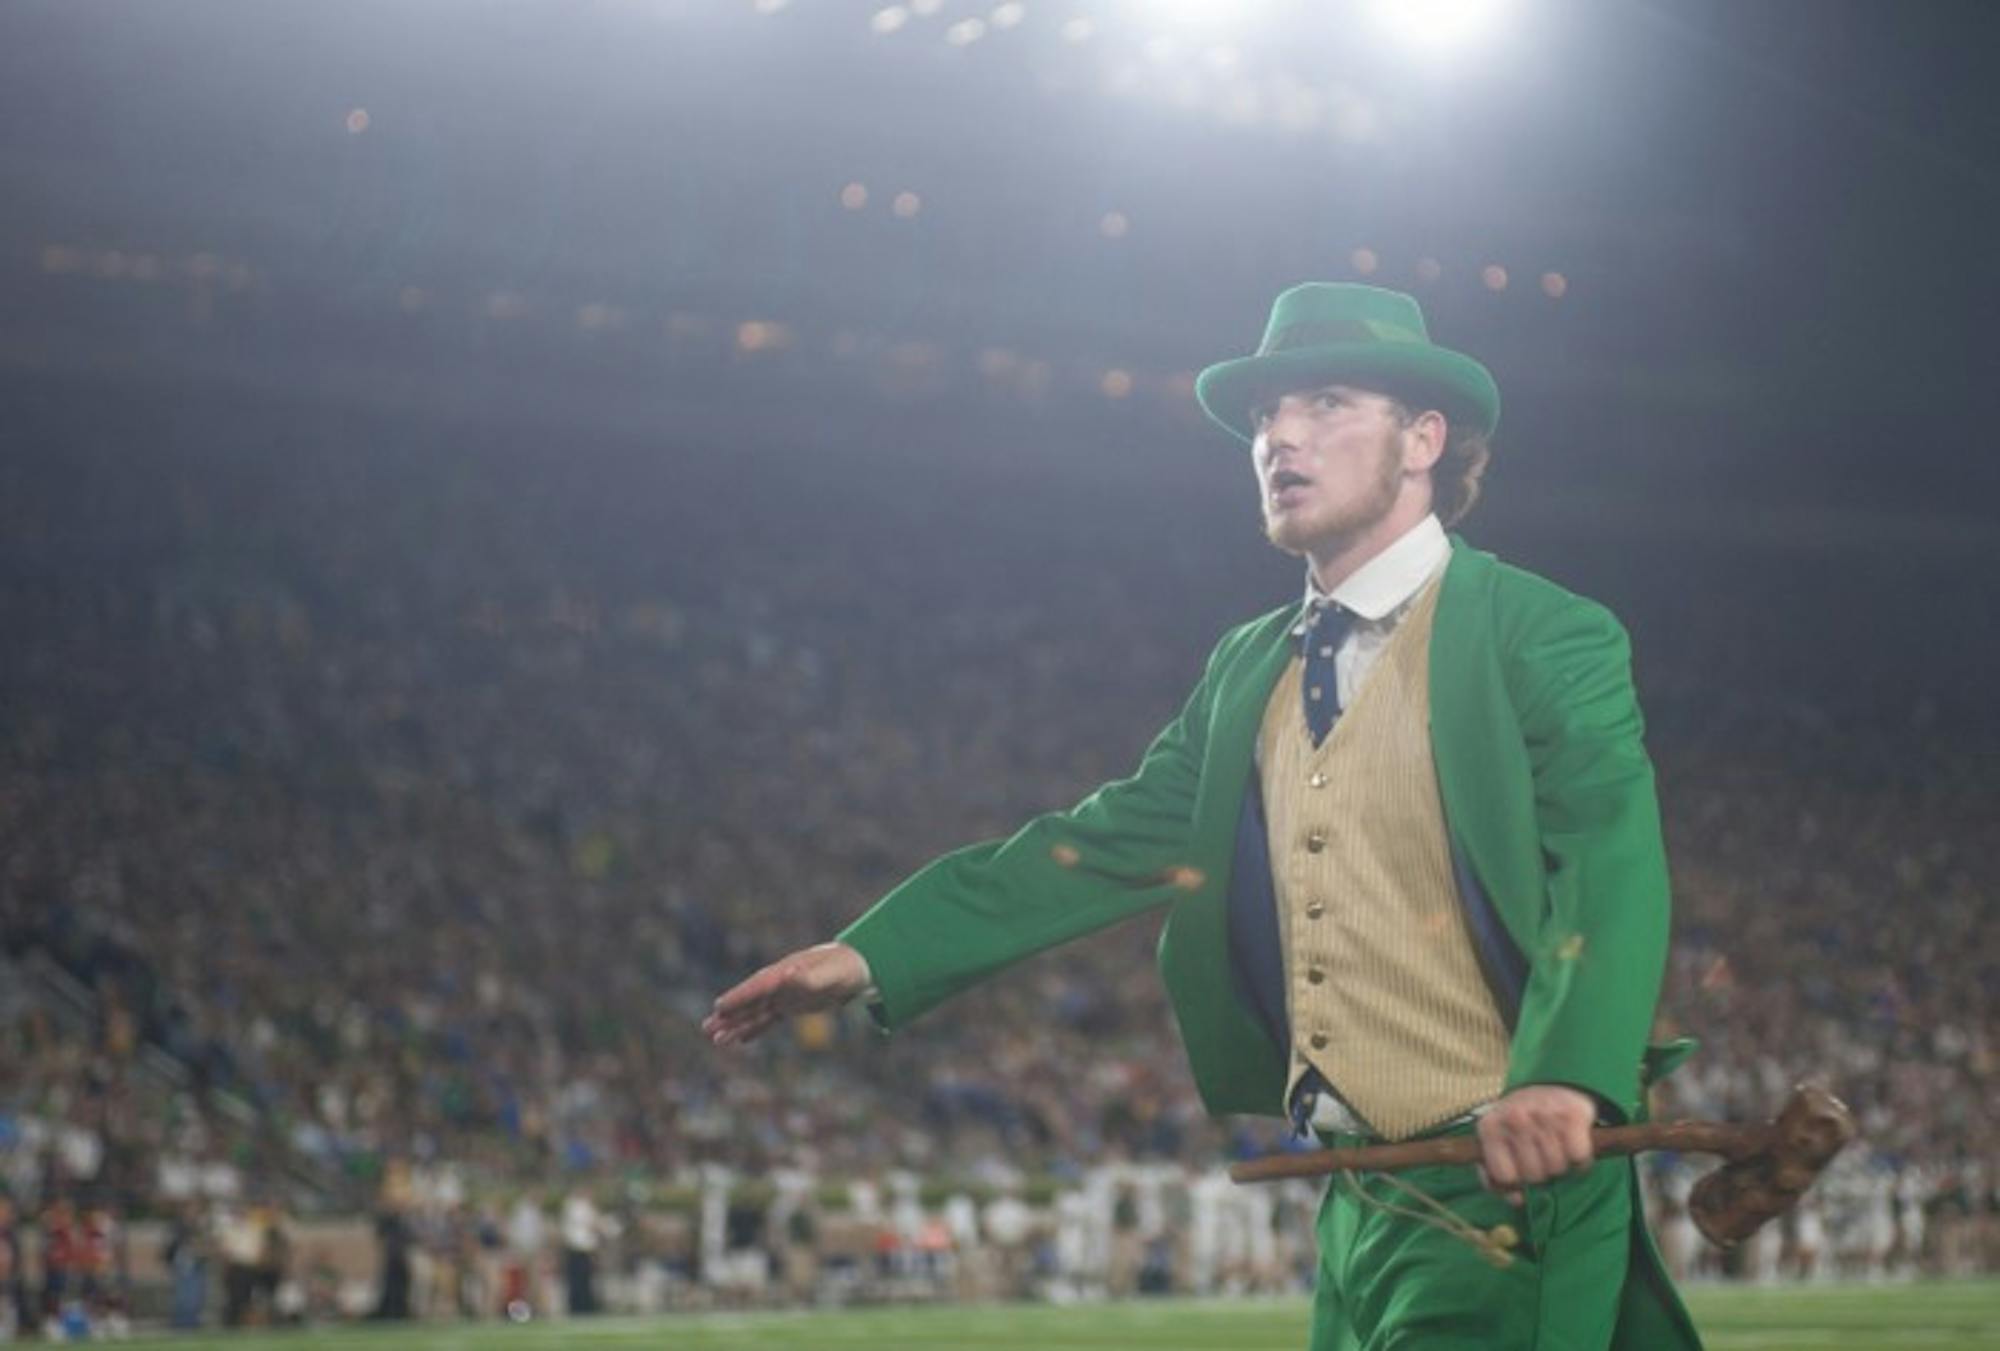 Football leprechaun Joe Fennessy interacted with the crowd at the Notre Dame football game against Michigan State last Saturday.